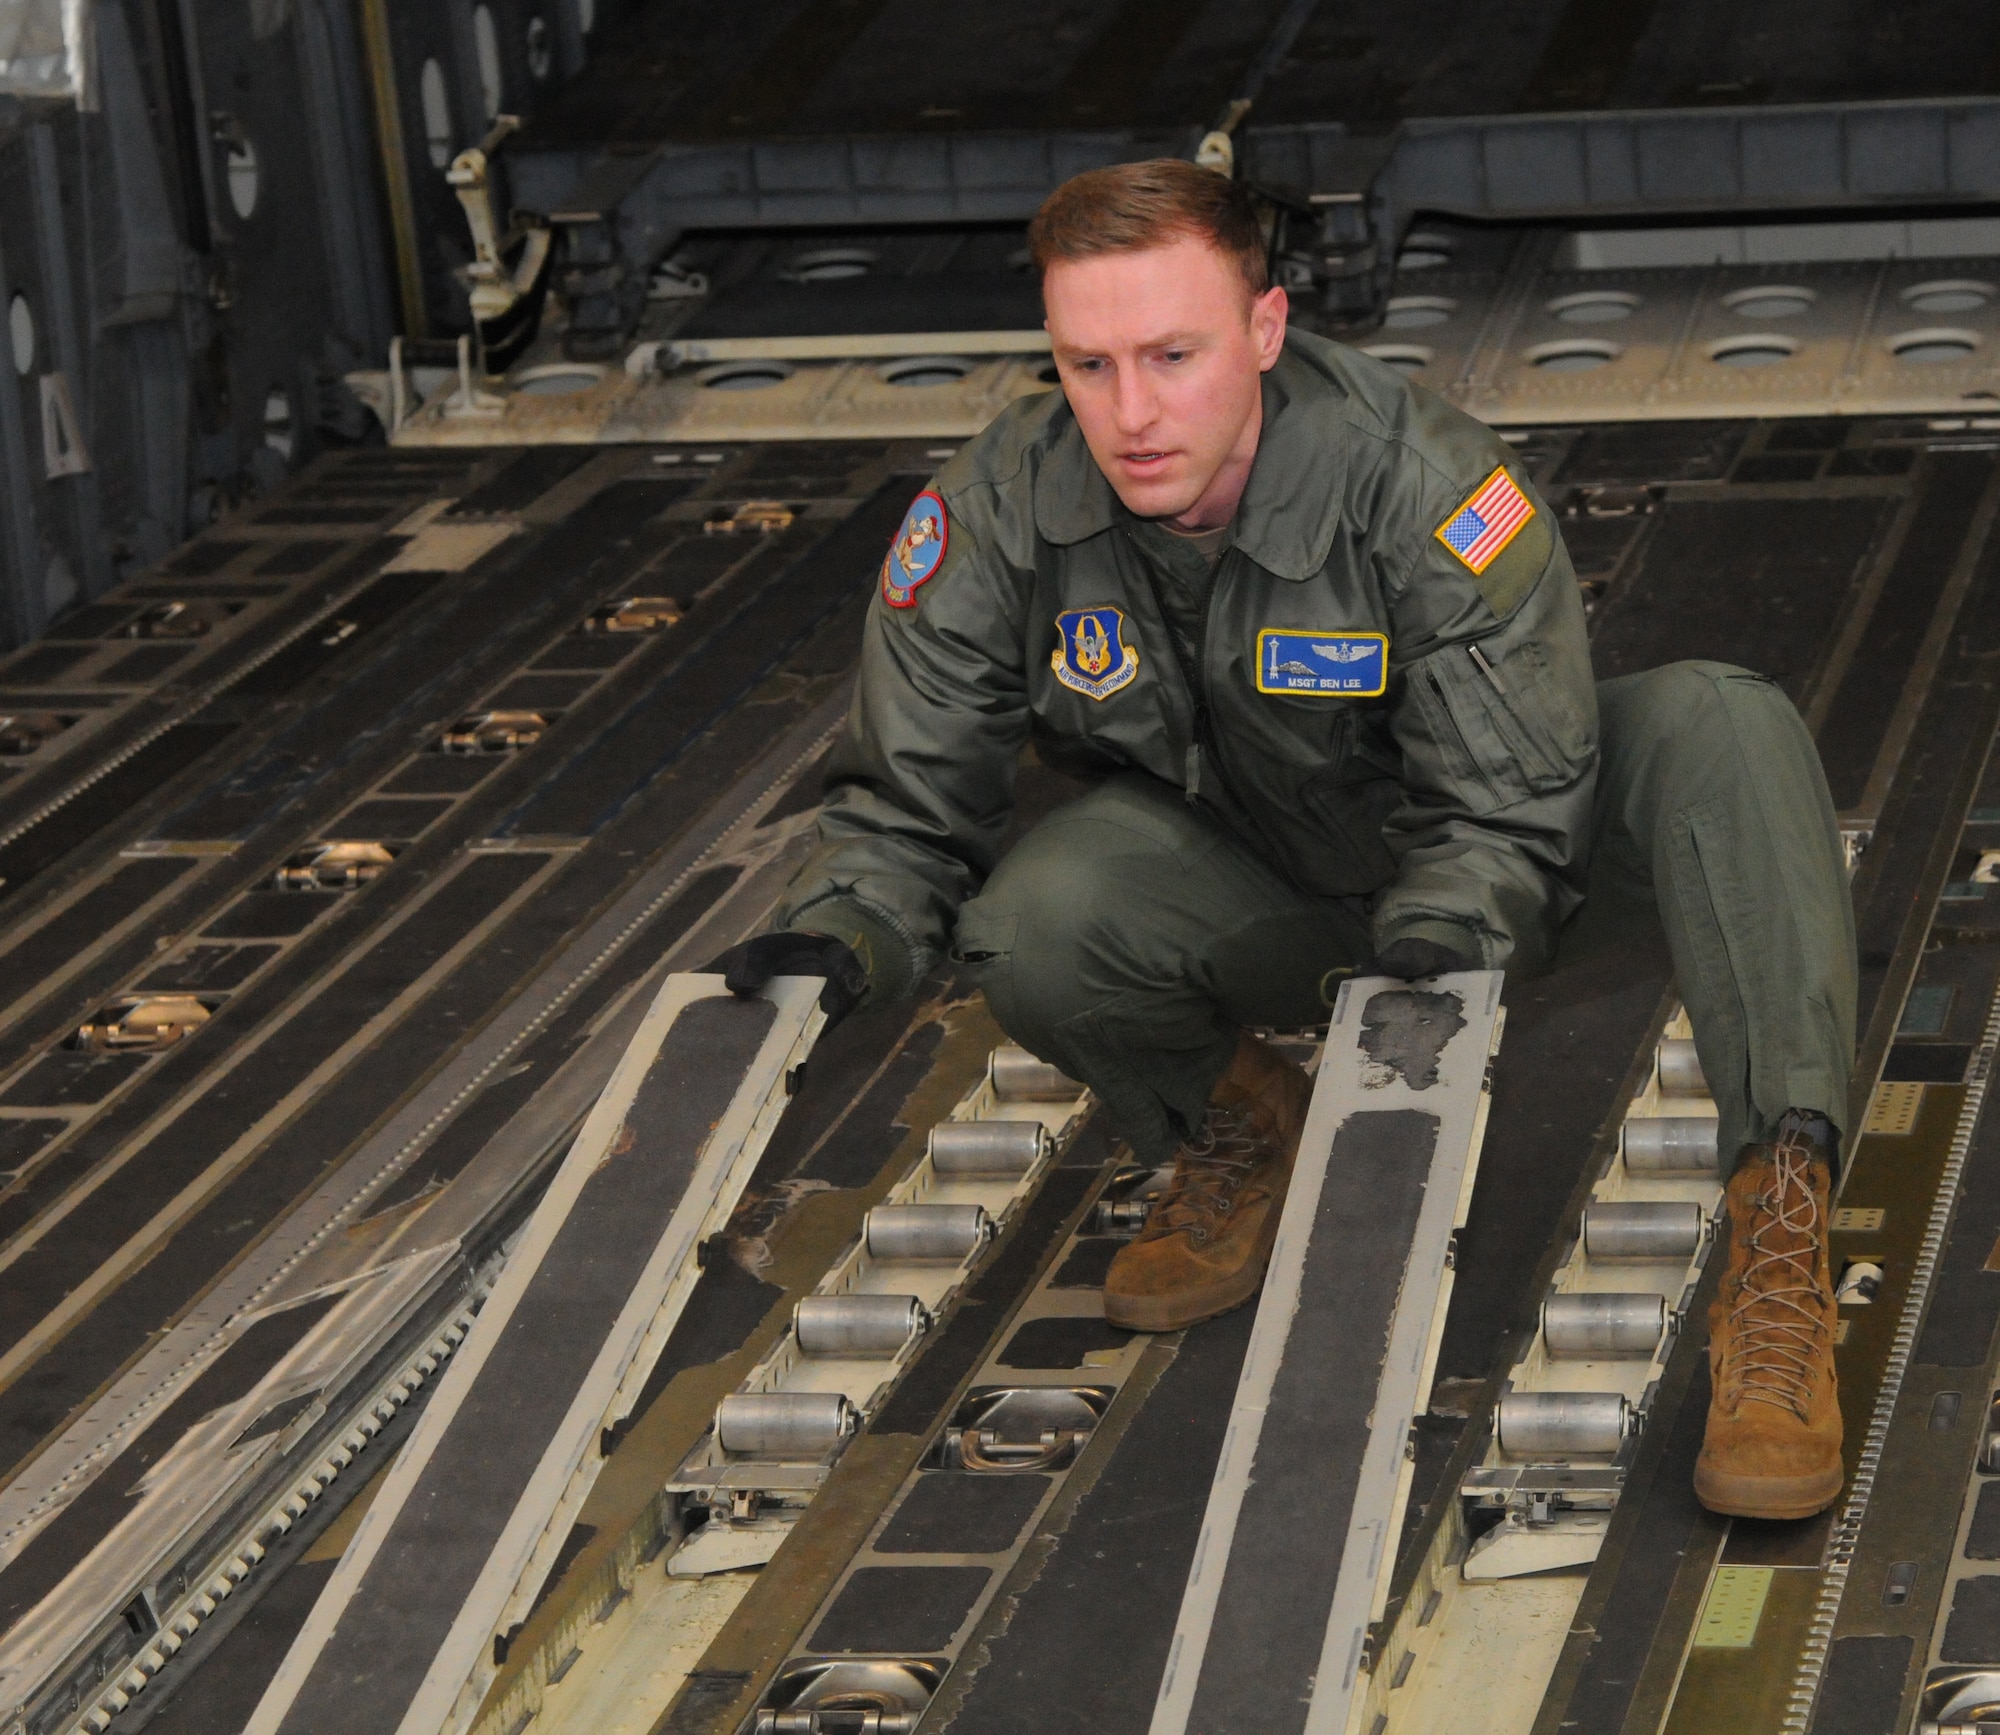 Master Sgt. Benjamin Lee, a loadmaster assigned to the 97th Airlift Squadron here, flips cargo rails rollers on a C-17 Globemaster III to prepare the aircraft for a cargo upload during a local sortie mission March 15, 2021.